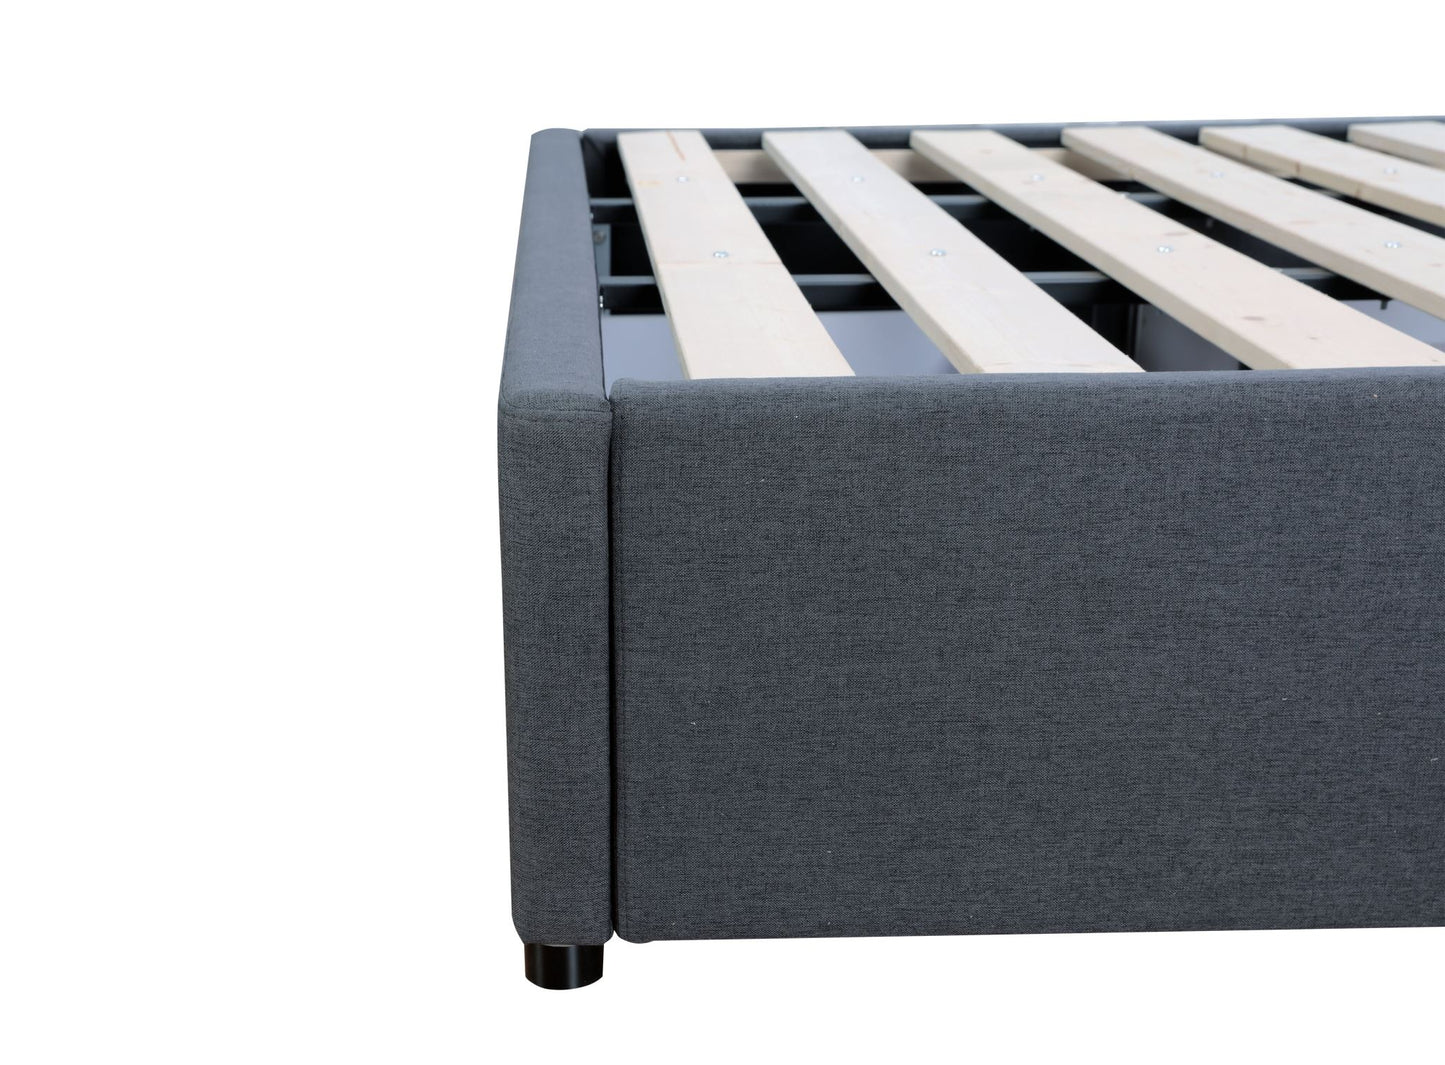 Bed Bases with 3 Drawers  - King - Charcoal